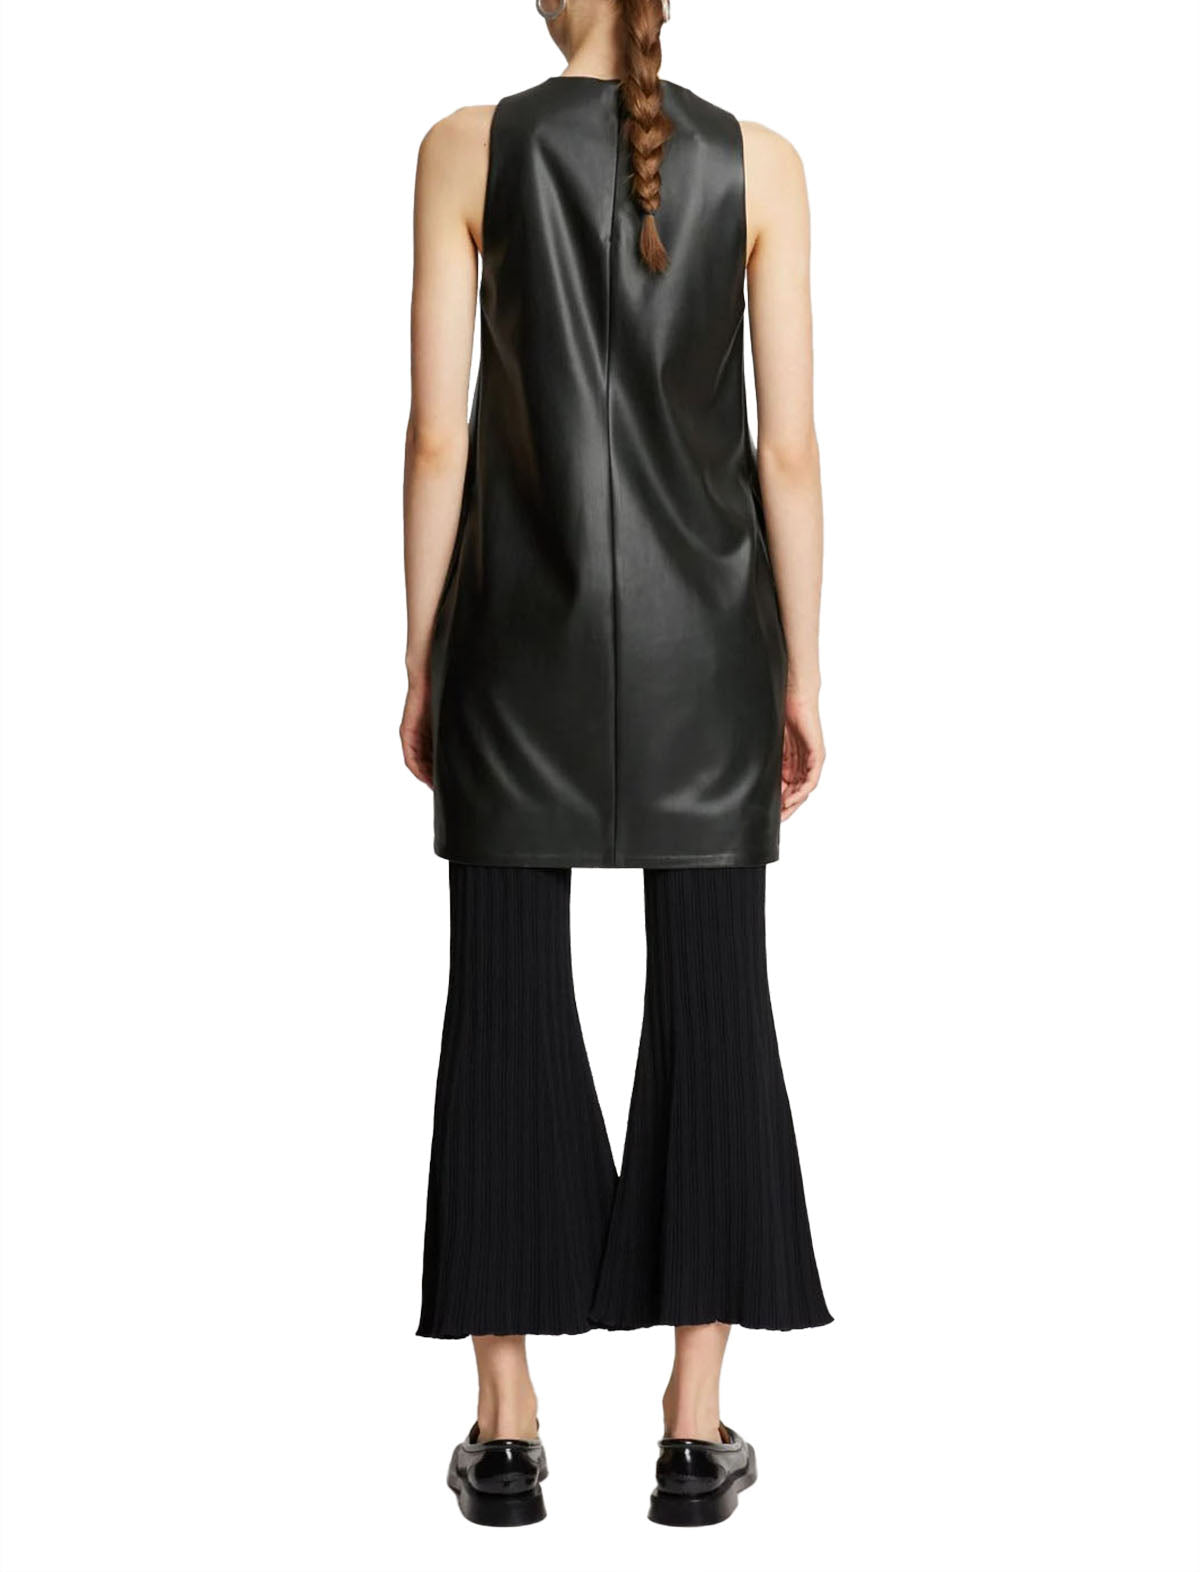 PROENZA SCHOULER WHITE LABEL Twisted Sleeveless Faux Leather Dress In Black